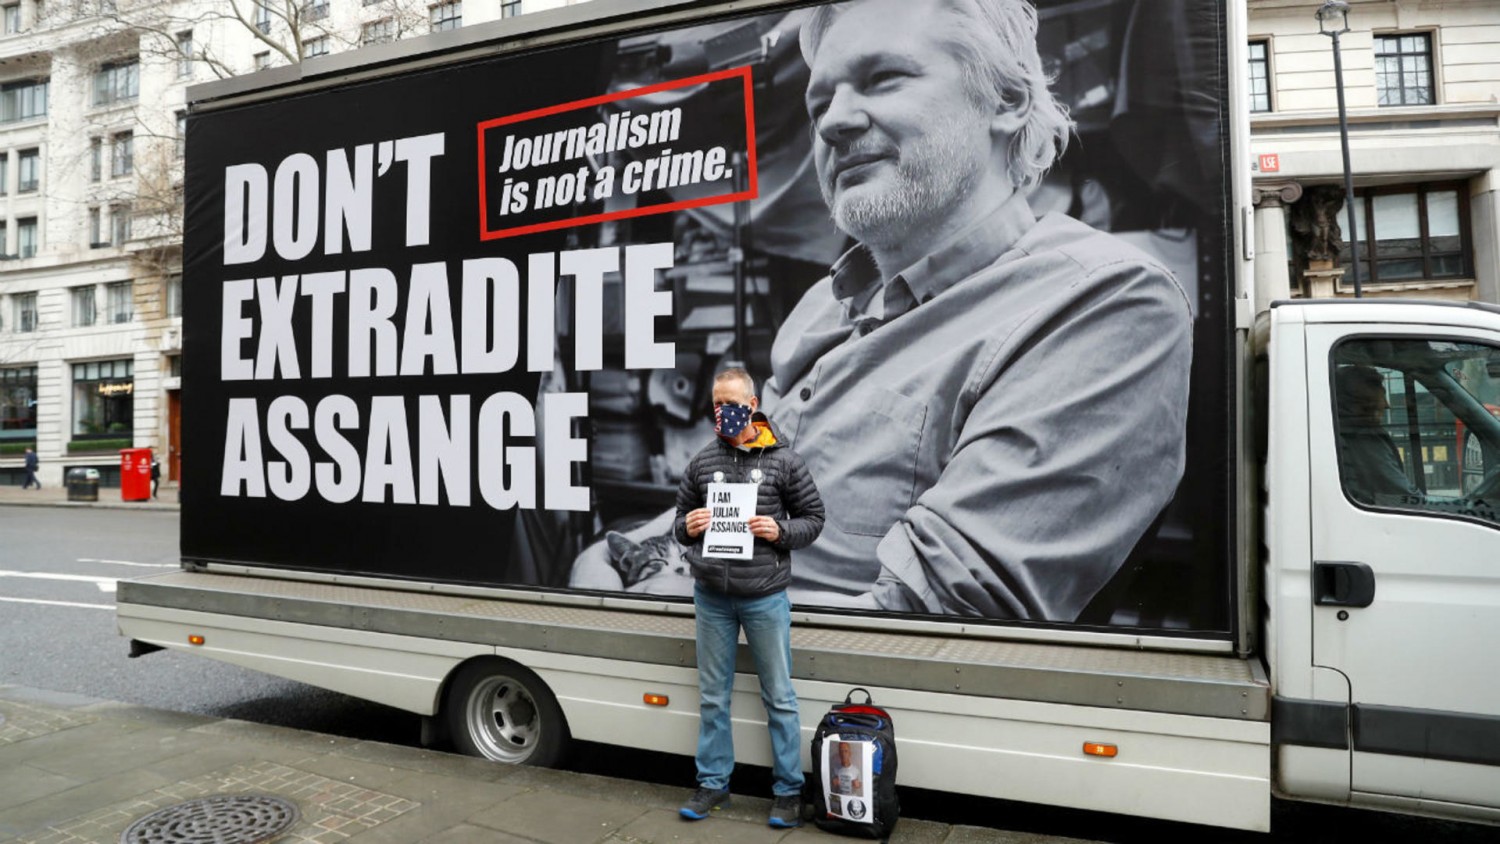 A supporter of WikiLeaks founder Julian Assange demonstrates against his extradition in London on February 22, 2020. © Peter Nicholls, REUTERS